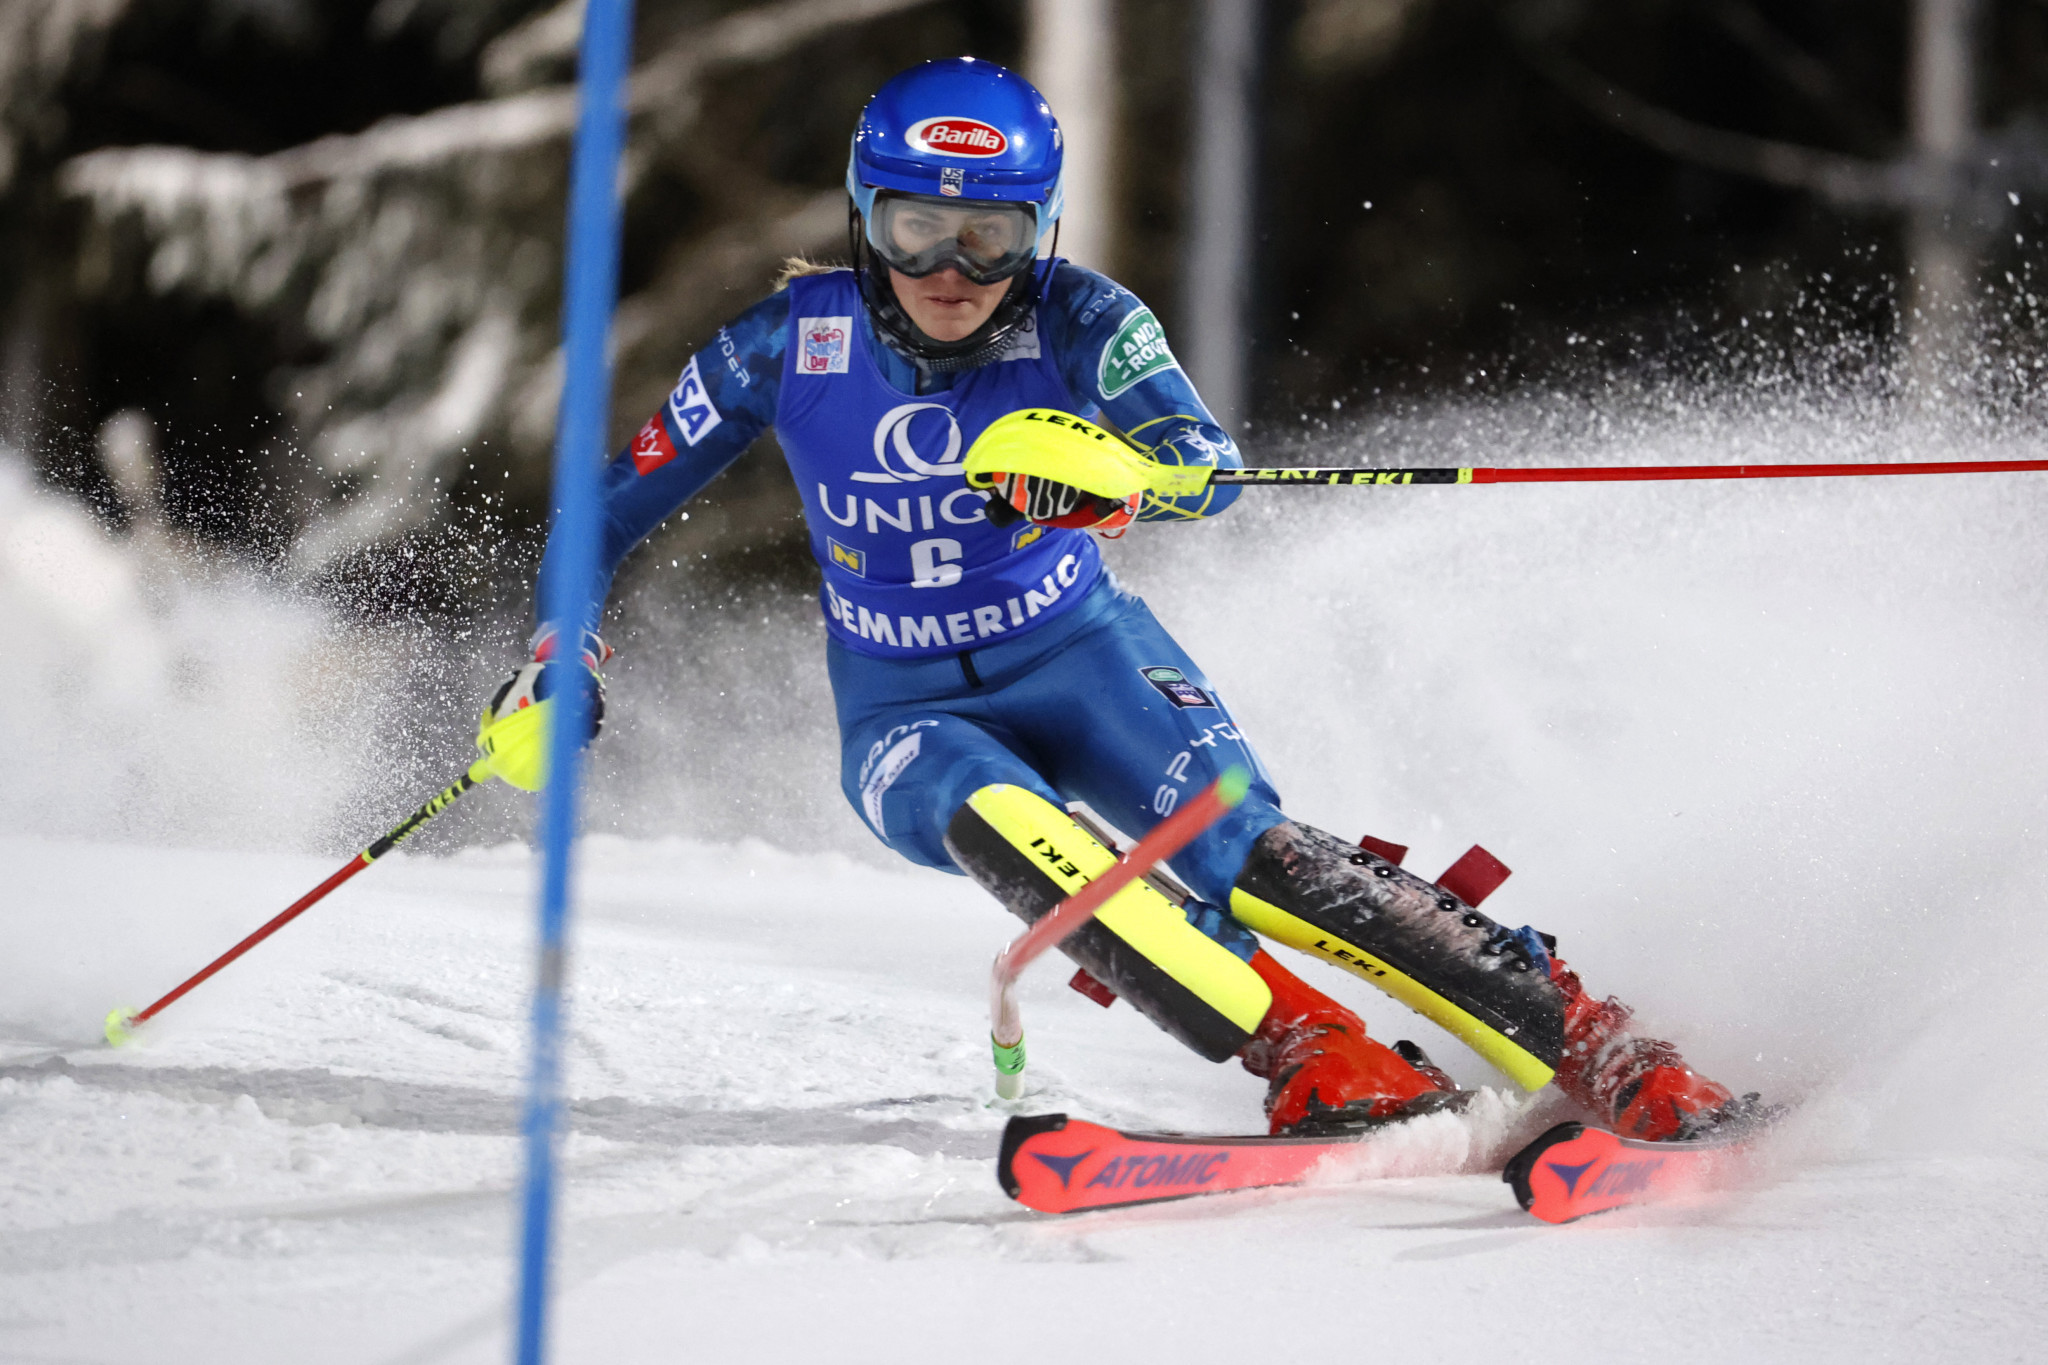 Mikaela Shiffrin praised organisers in Zagreb for ensuring competition could take place ©Getty Images